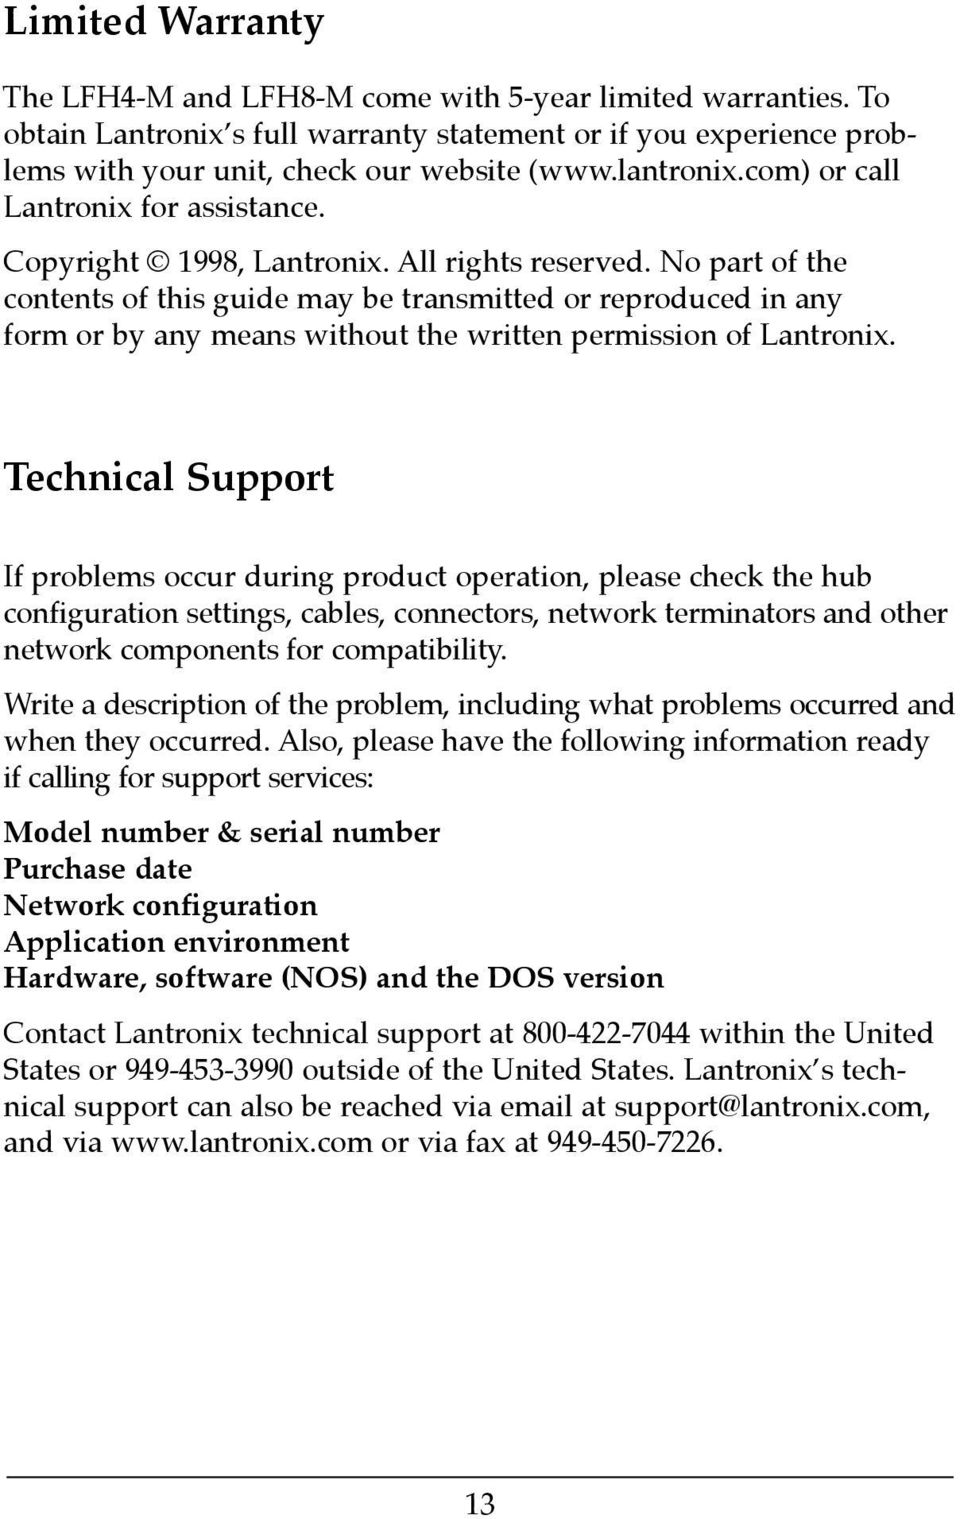 No part of the contents of this guide may be transmitted or reproduced in any form or by any means without the written permission of Lantronix.